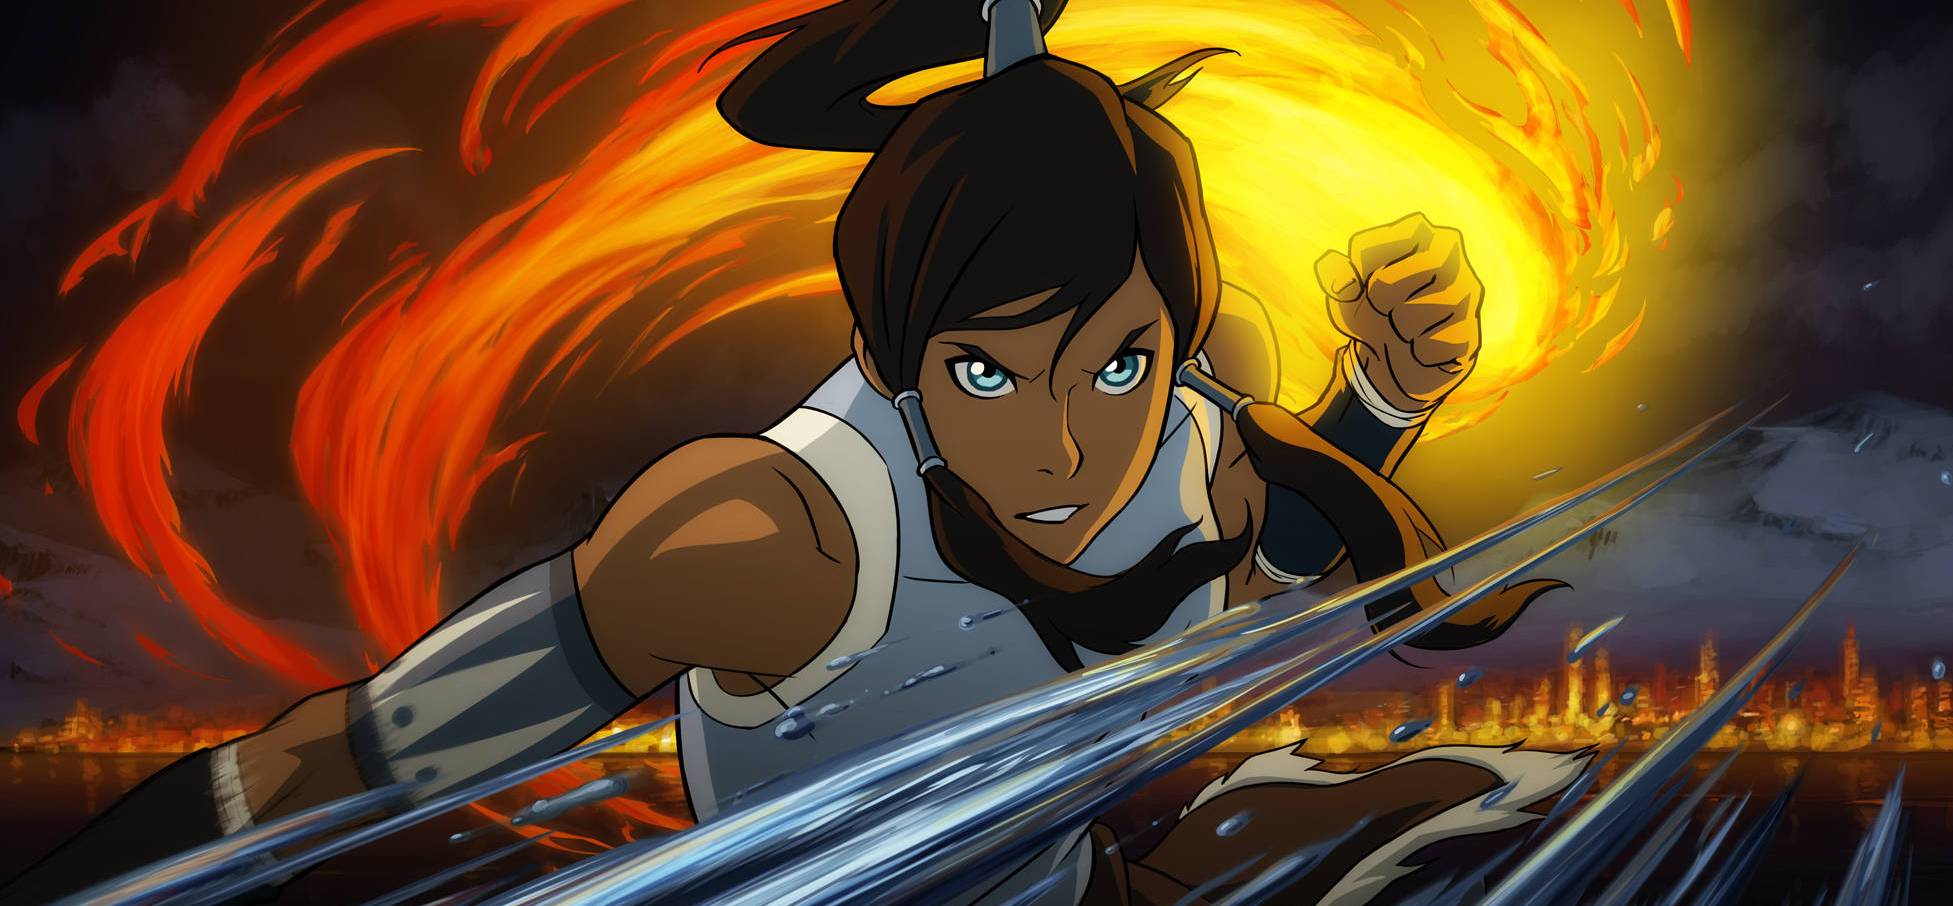 Pictured:  Korra demonstrates fire and waterbending in THE LEGEND OF KORRA on Nickelodeon.  Photo: Nickelodeon.  ©2012 Viacom, International, Inc.  All Rights Reserved